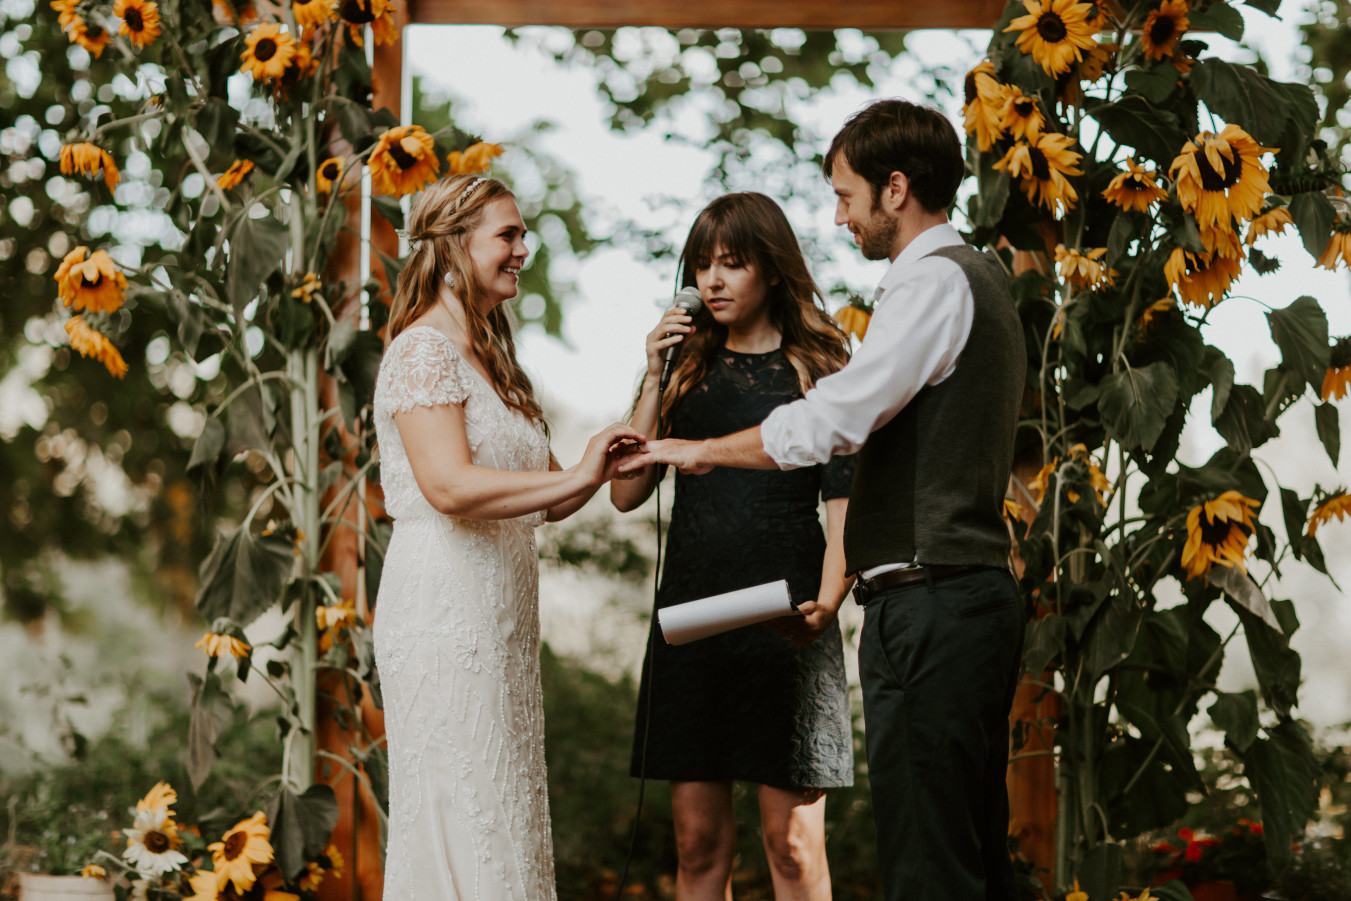 Hannah places a ring on Dan's finger in Corvallis, Oregon. Intimate wedding photography in Corvallis Oregon by Sienna Plus Josh.